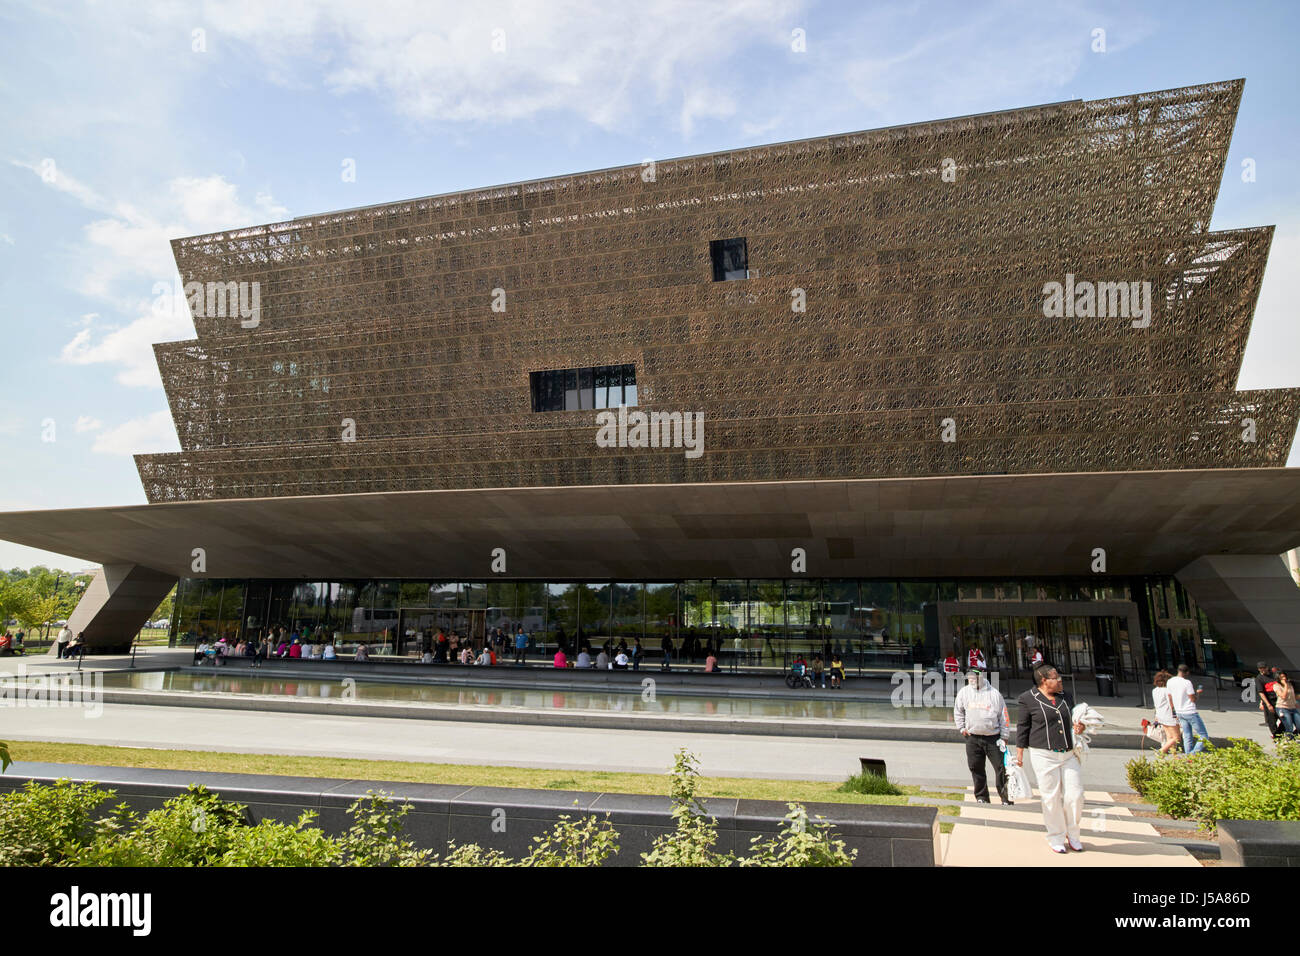 smithsonian national museum of african american history and culture Washington DC USA Stock Photo